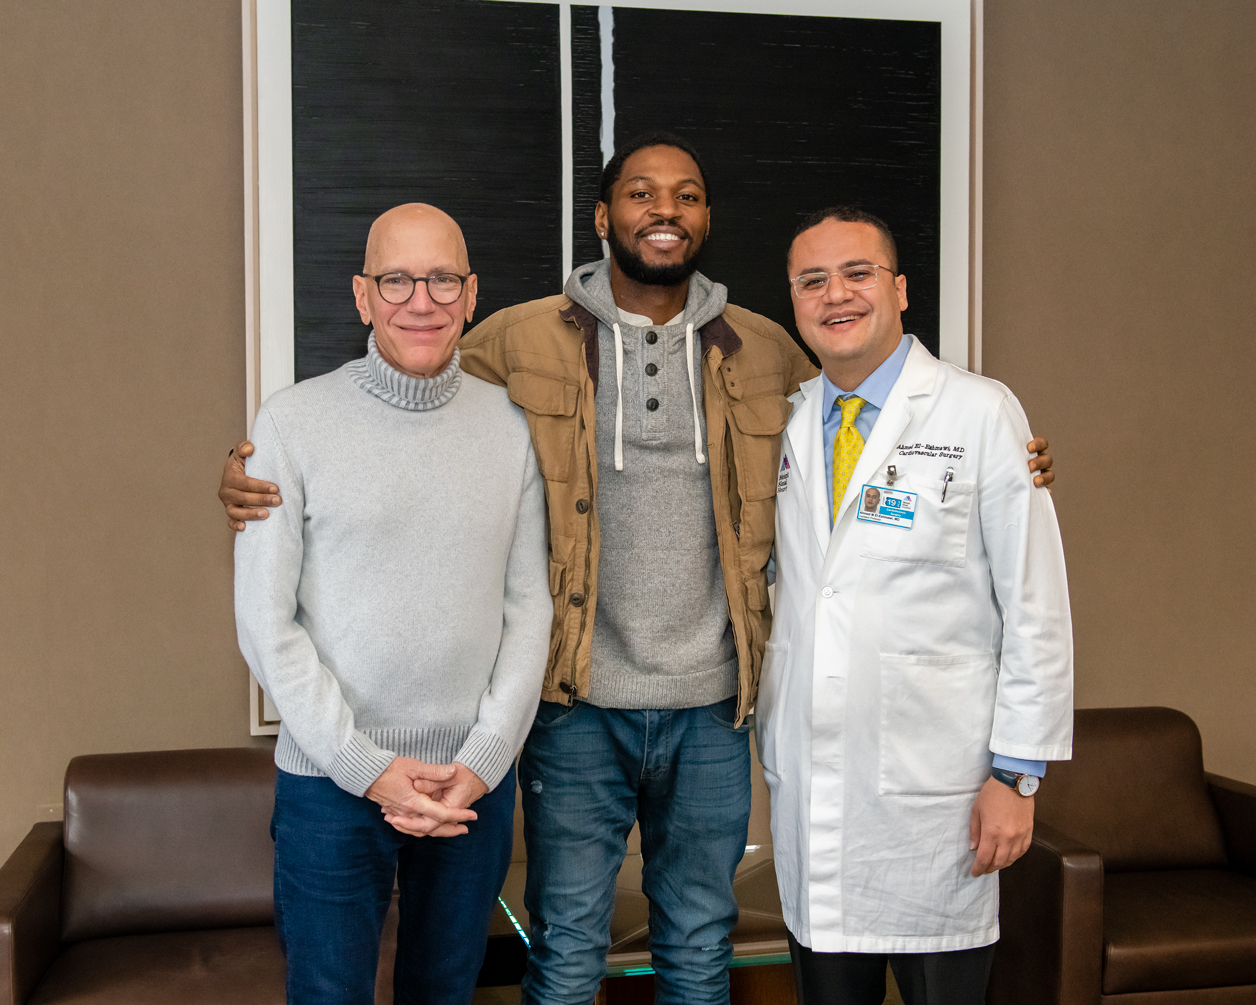 Noel poses with Drs. Adams and El-Eshmawi weeks after his surgery during his follow-up visit.